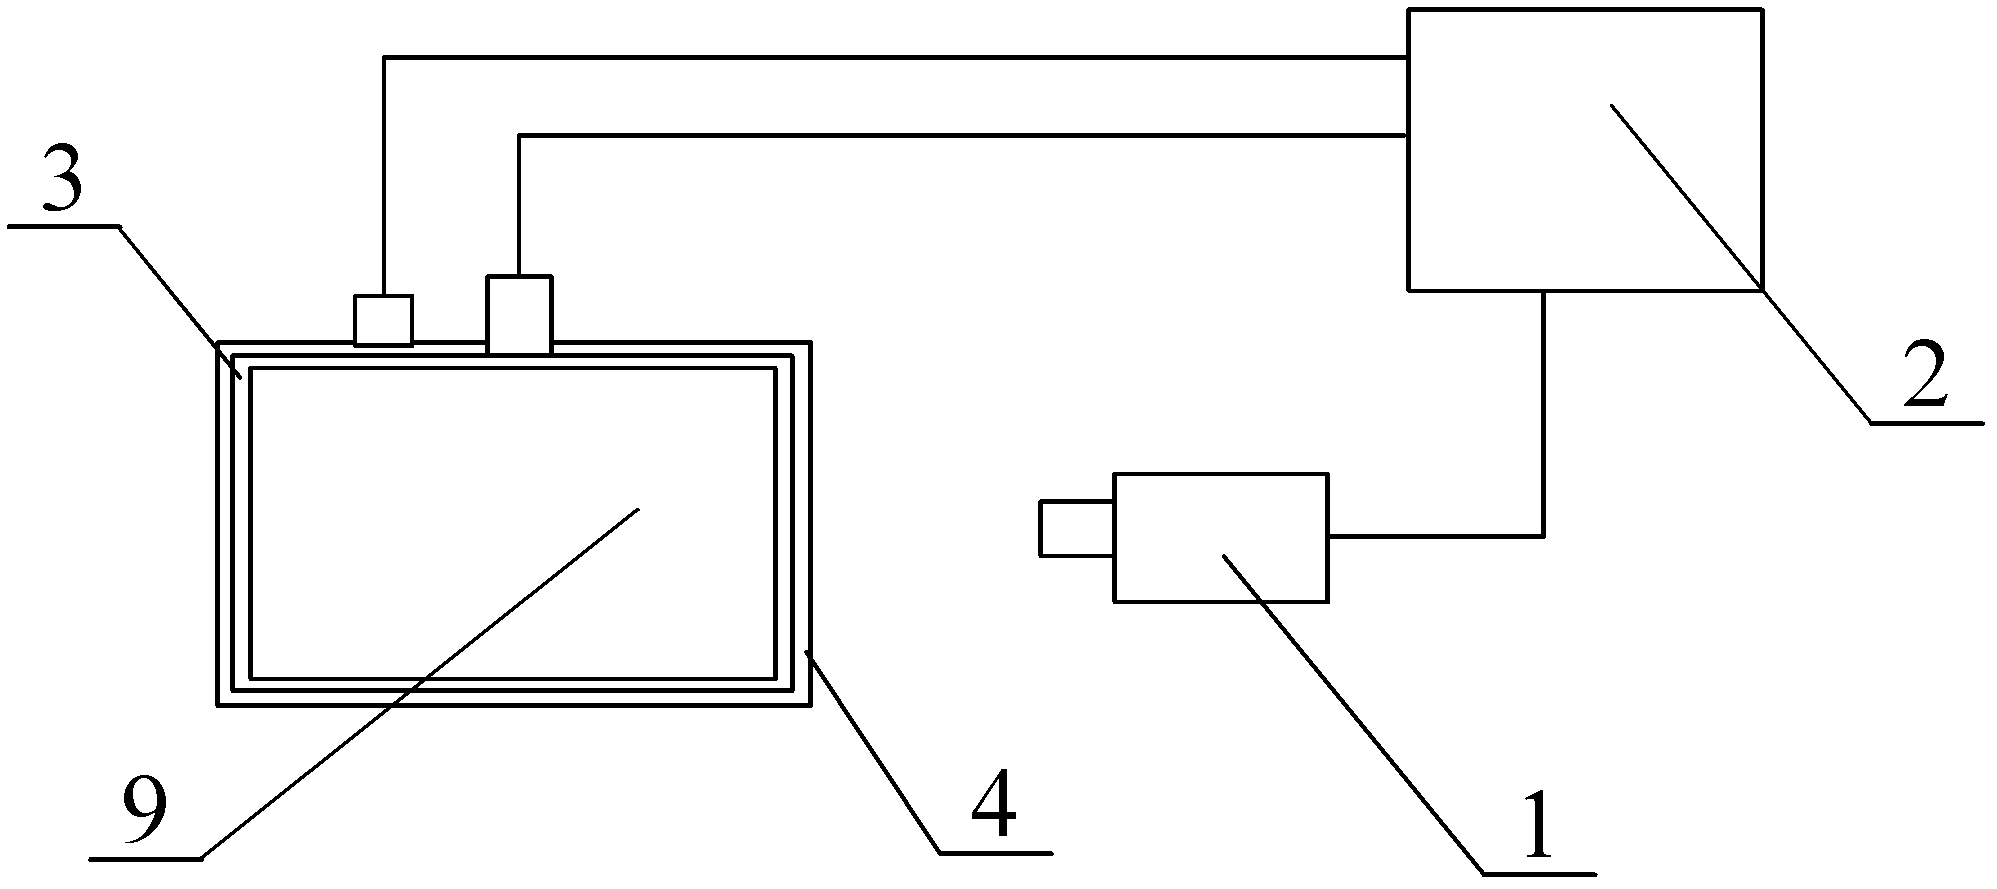 Back projection system applied to device with transparent desktop